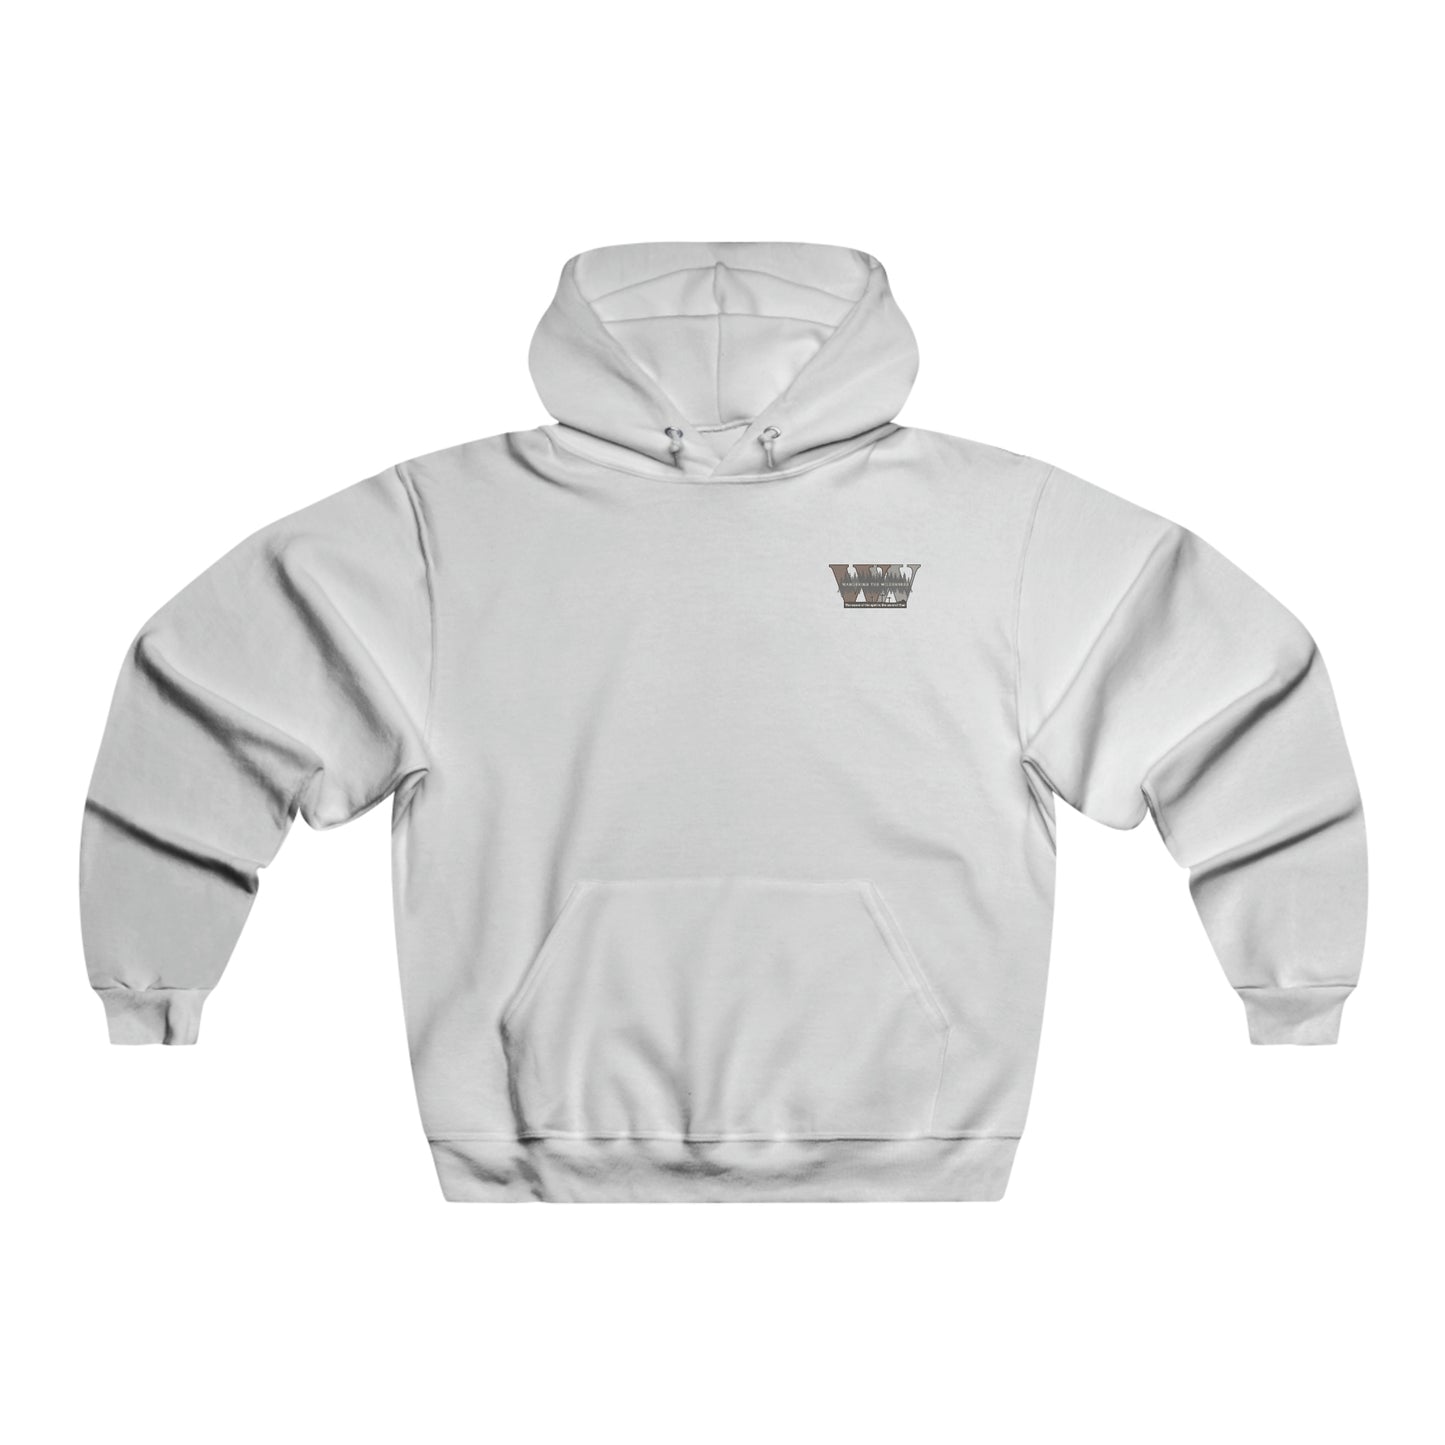 Wandering the Wilderness There is power in the blood Men's NUBLEND® Hooded Sweatshirt